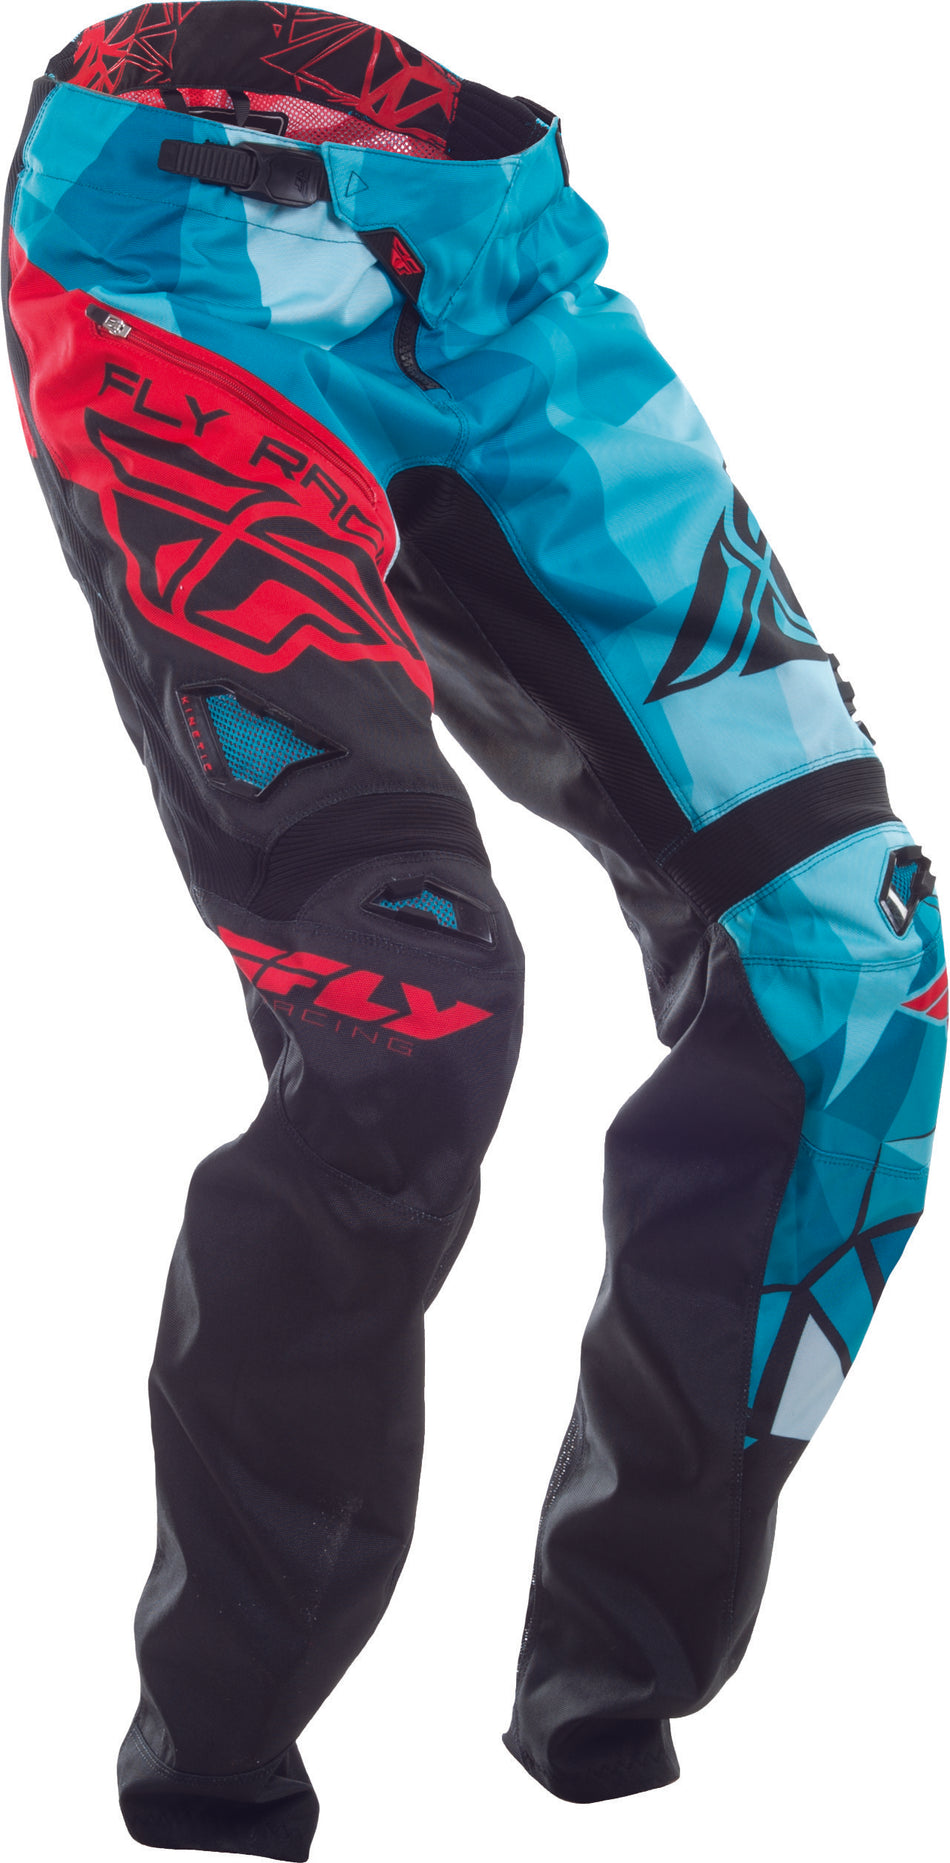 FLY RACING Bicycle Crux Pant Black/Teal/Red Sz 38 370-02938